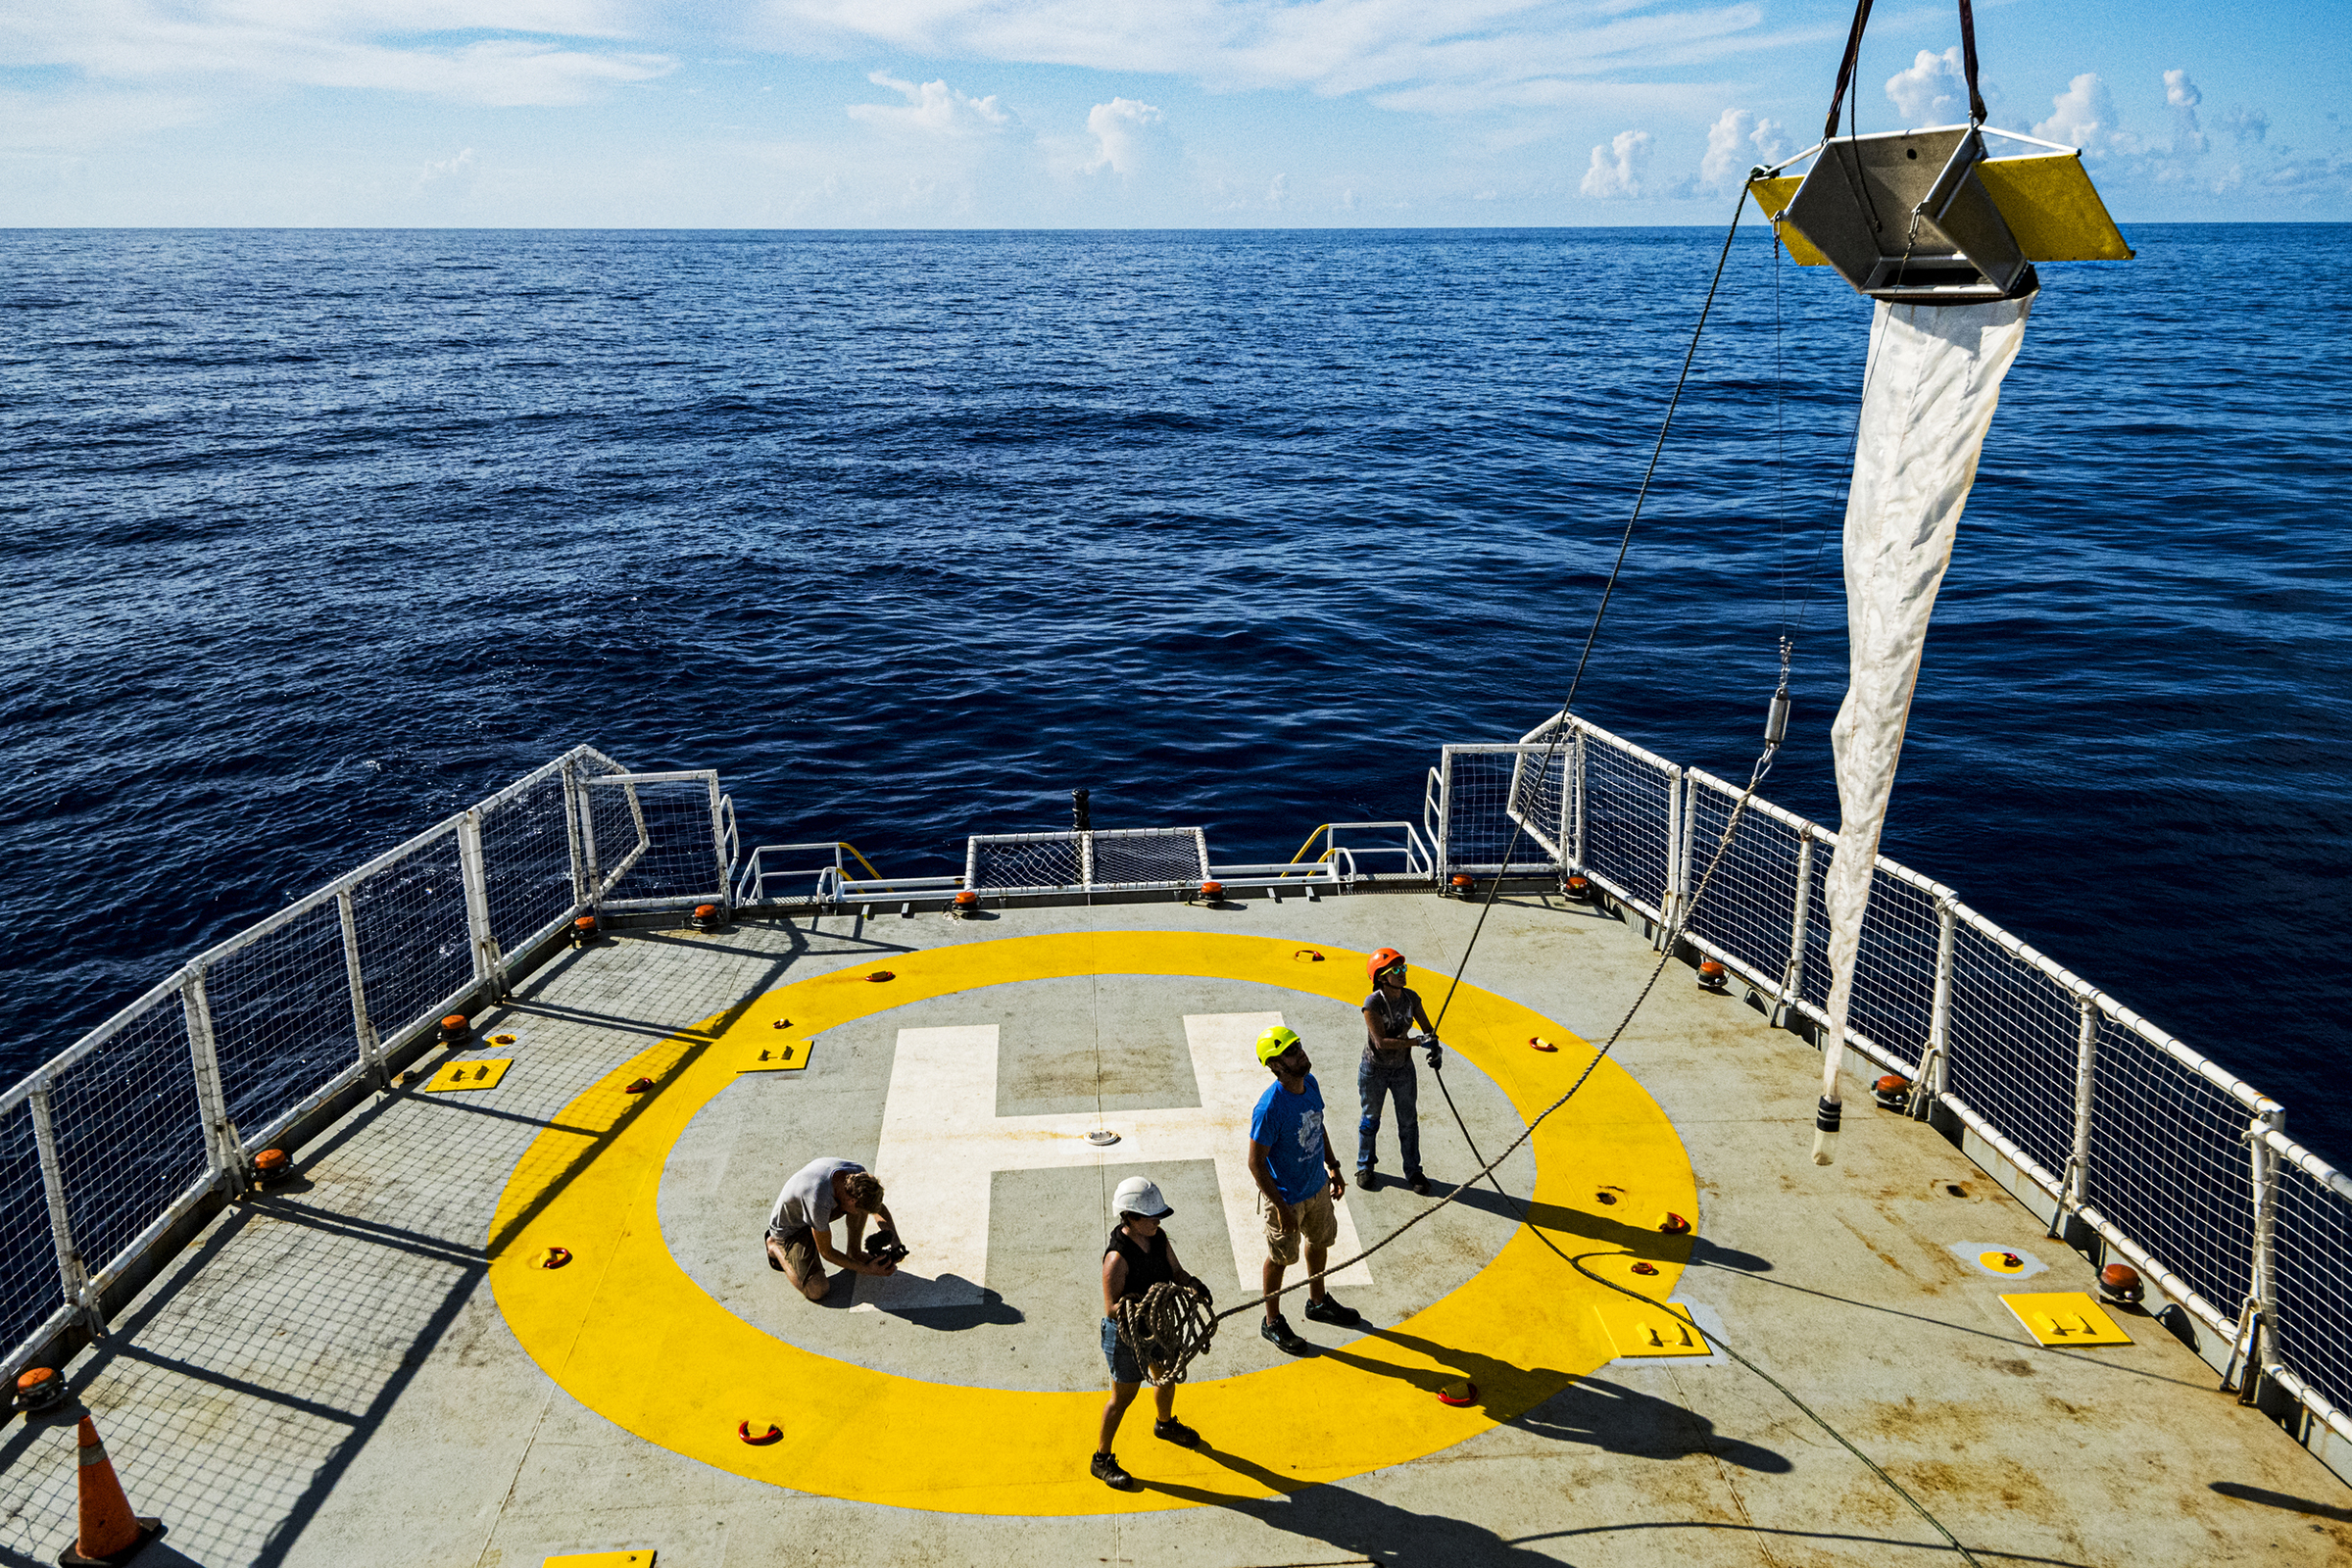 Crew members deploy a research trawl net from the deck of the MY Esperanza during the ship's expedition to the Sargasso Sea, a unique region in the North Atlantic Ocean that is home to a diverse array of marine life. (Shane Gross—Greenpeace.)